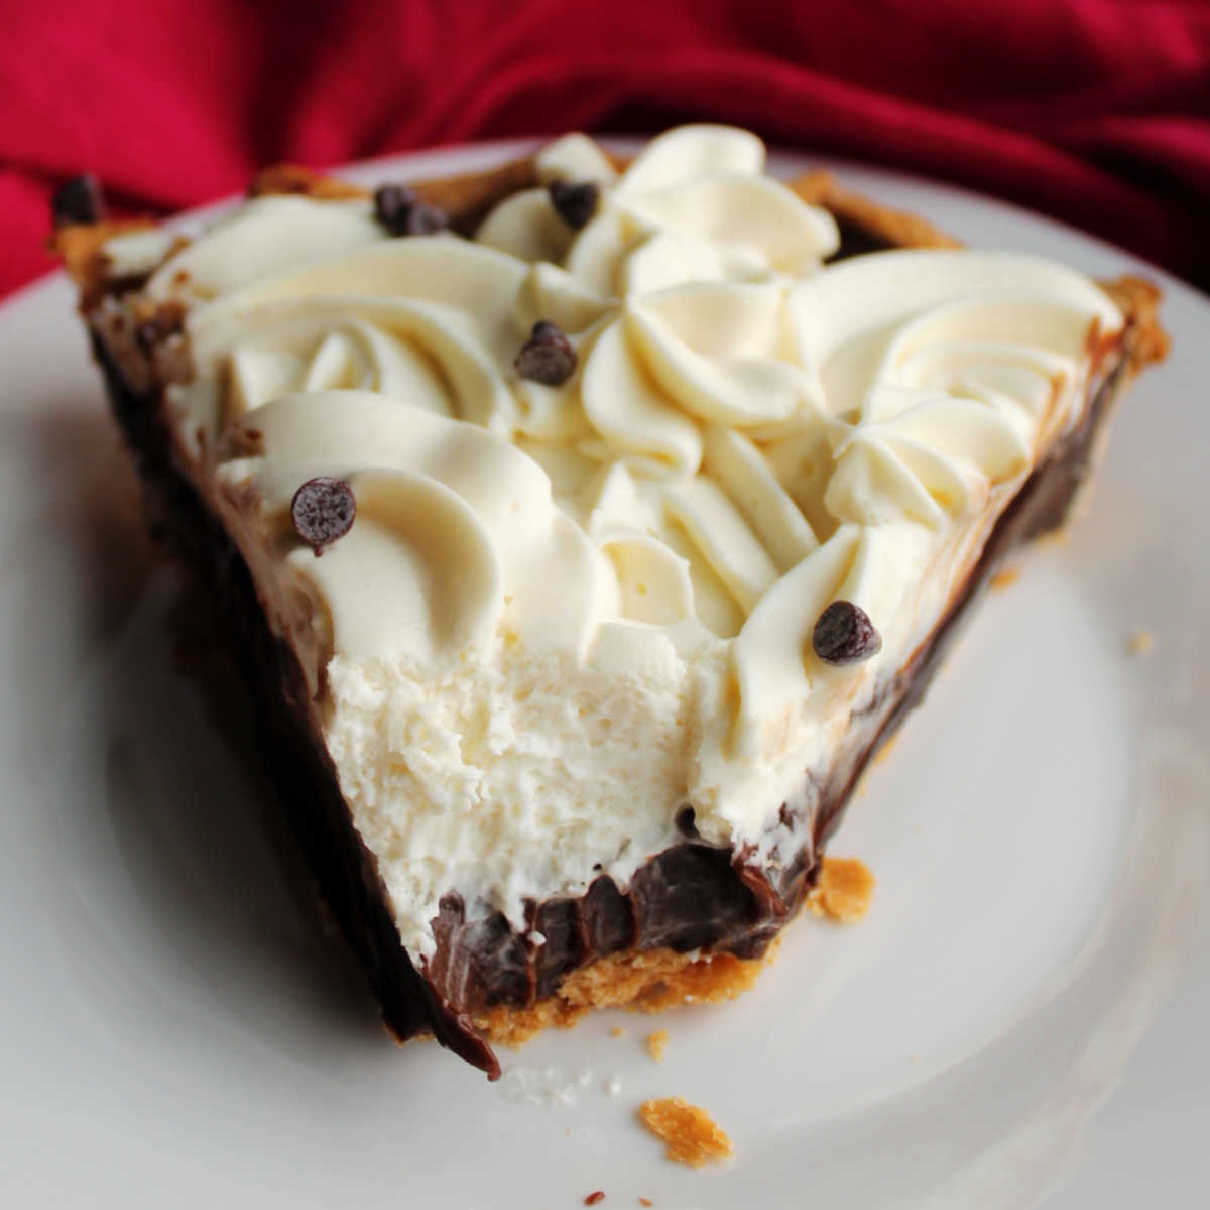 Slice of chocolate pie with smooth chocolate filling and swirls of cream cheese whipped cream piped on top missing bite in front showing the layers.